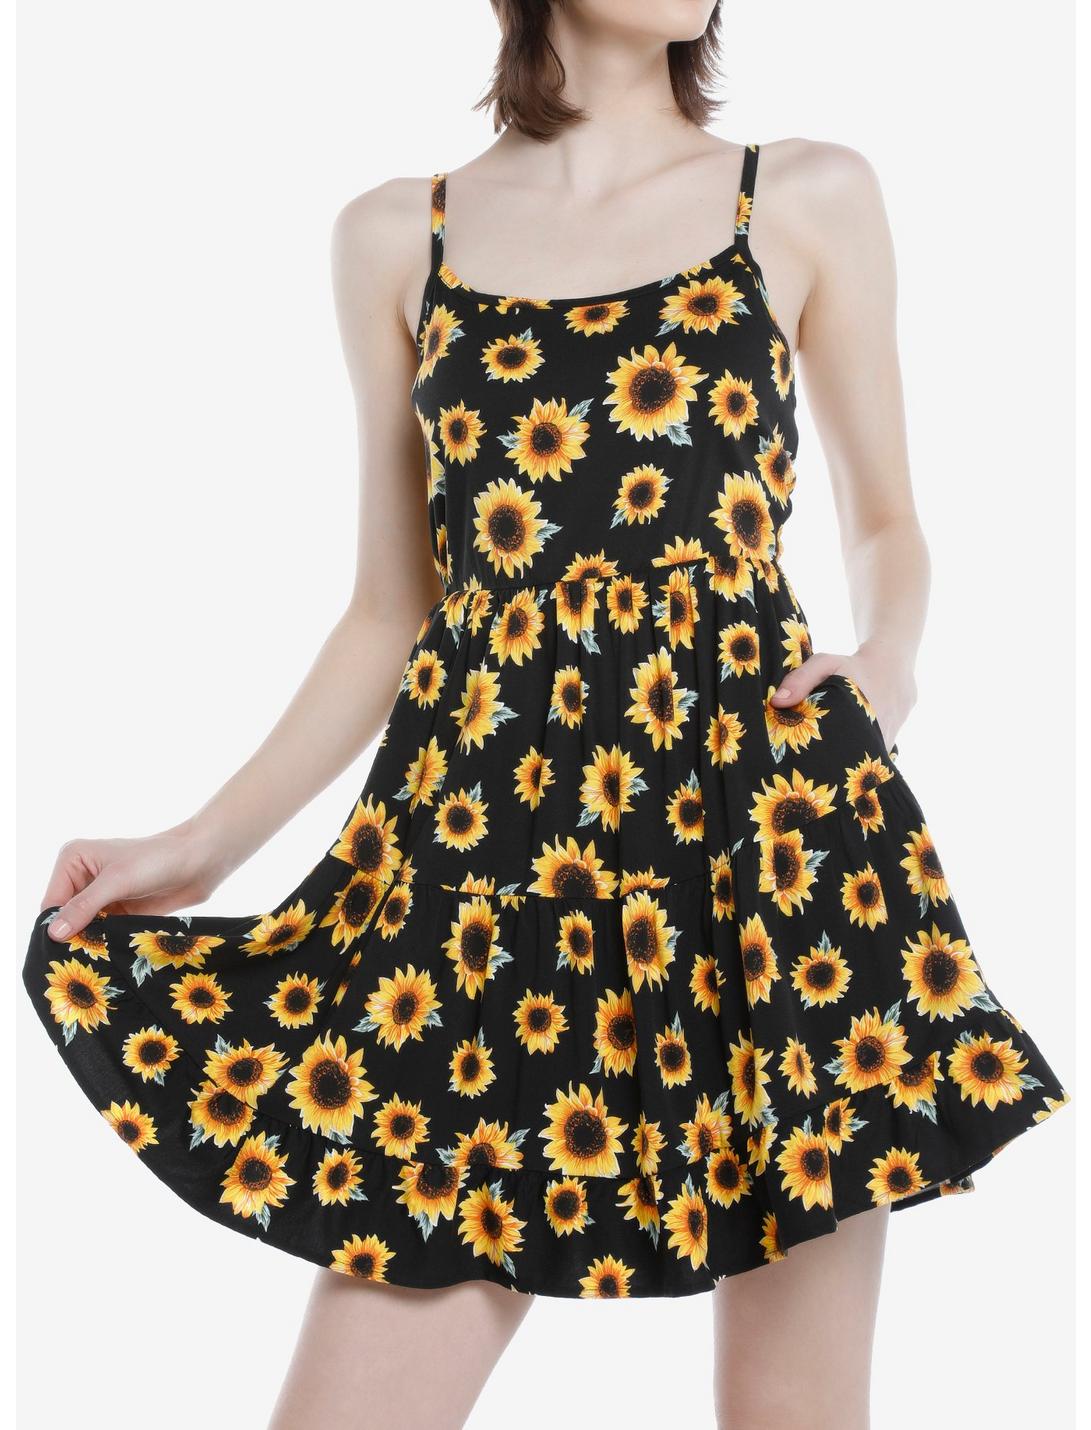 Sunflower Tiered Strappy Dress | Hot Topic